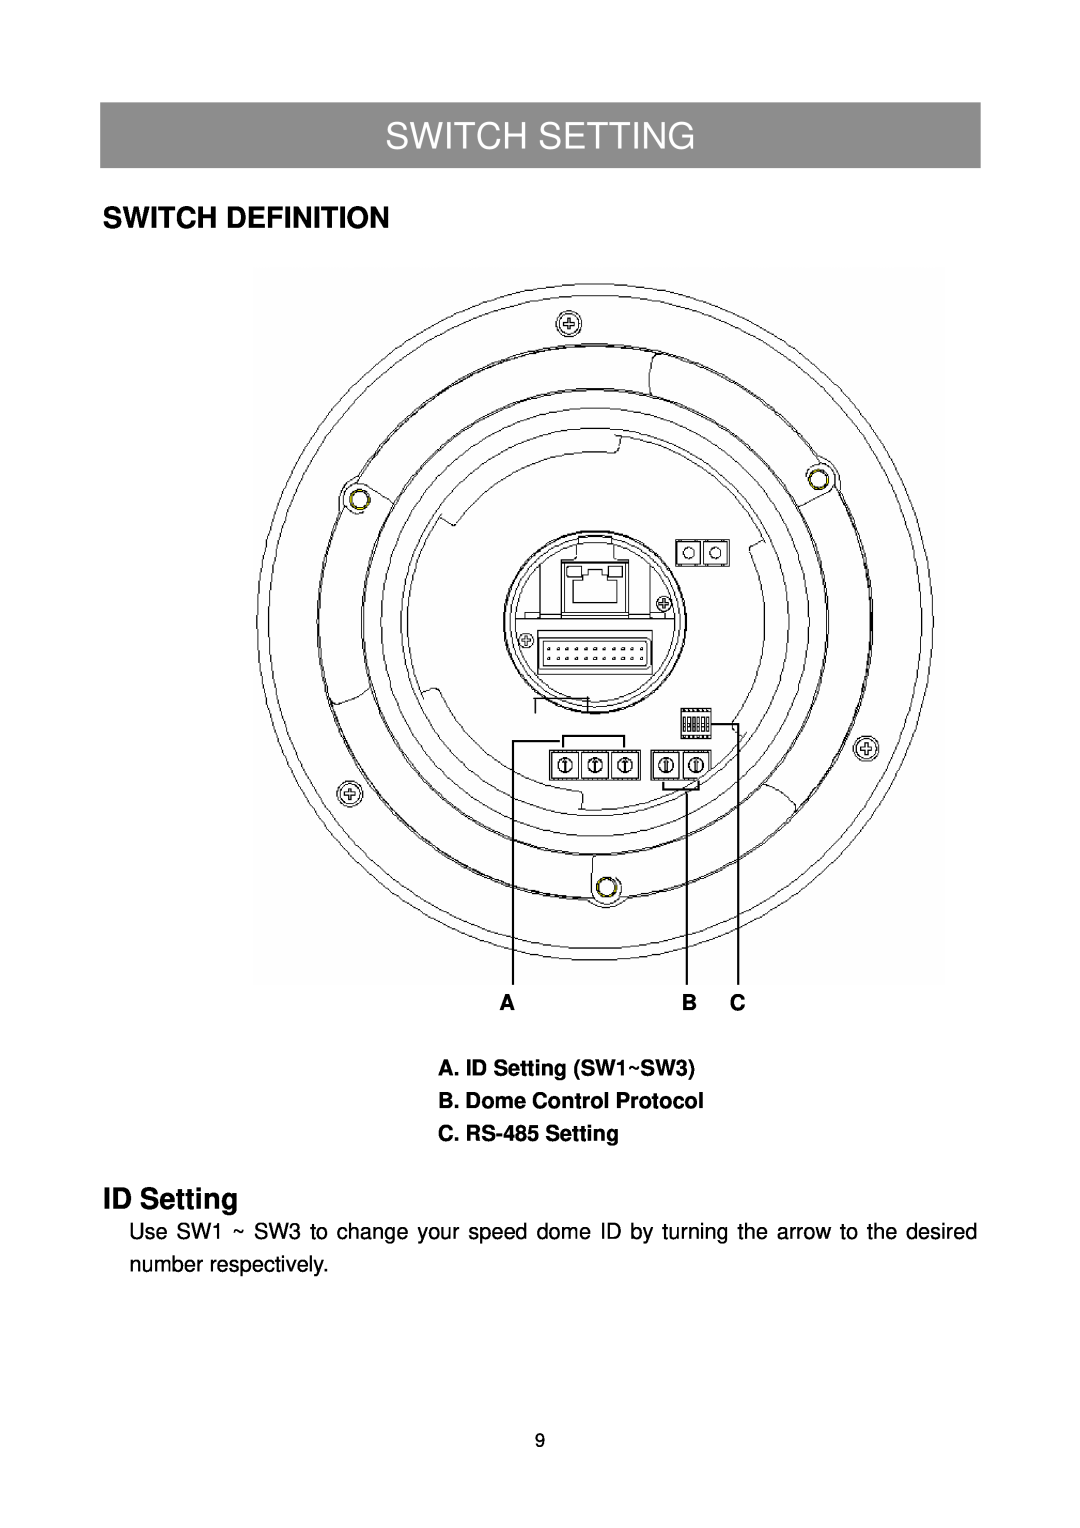 Elmo ESD-380 user manual Switch Setting, Switch Definition, ID Setting 